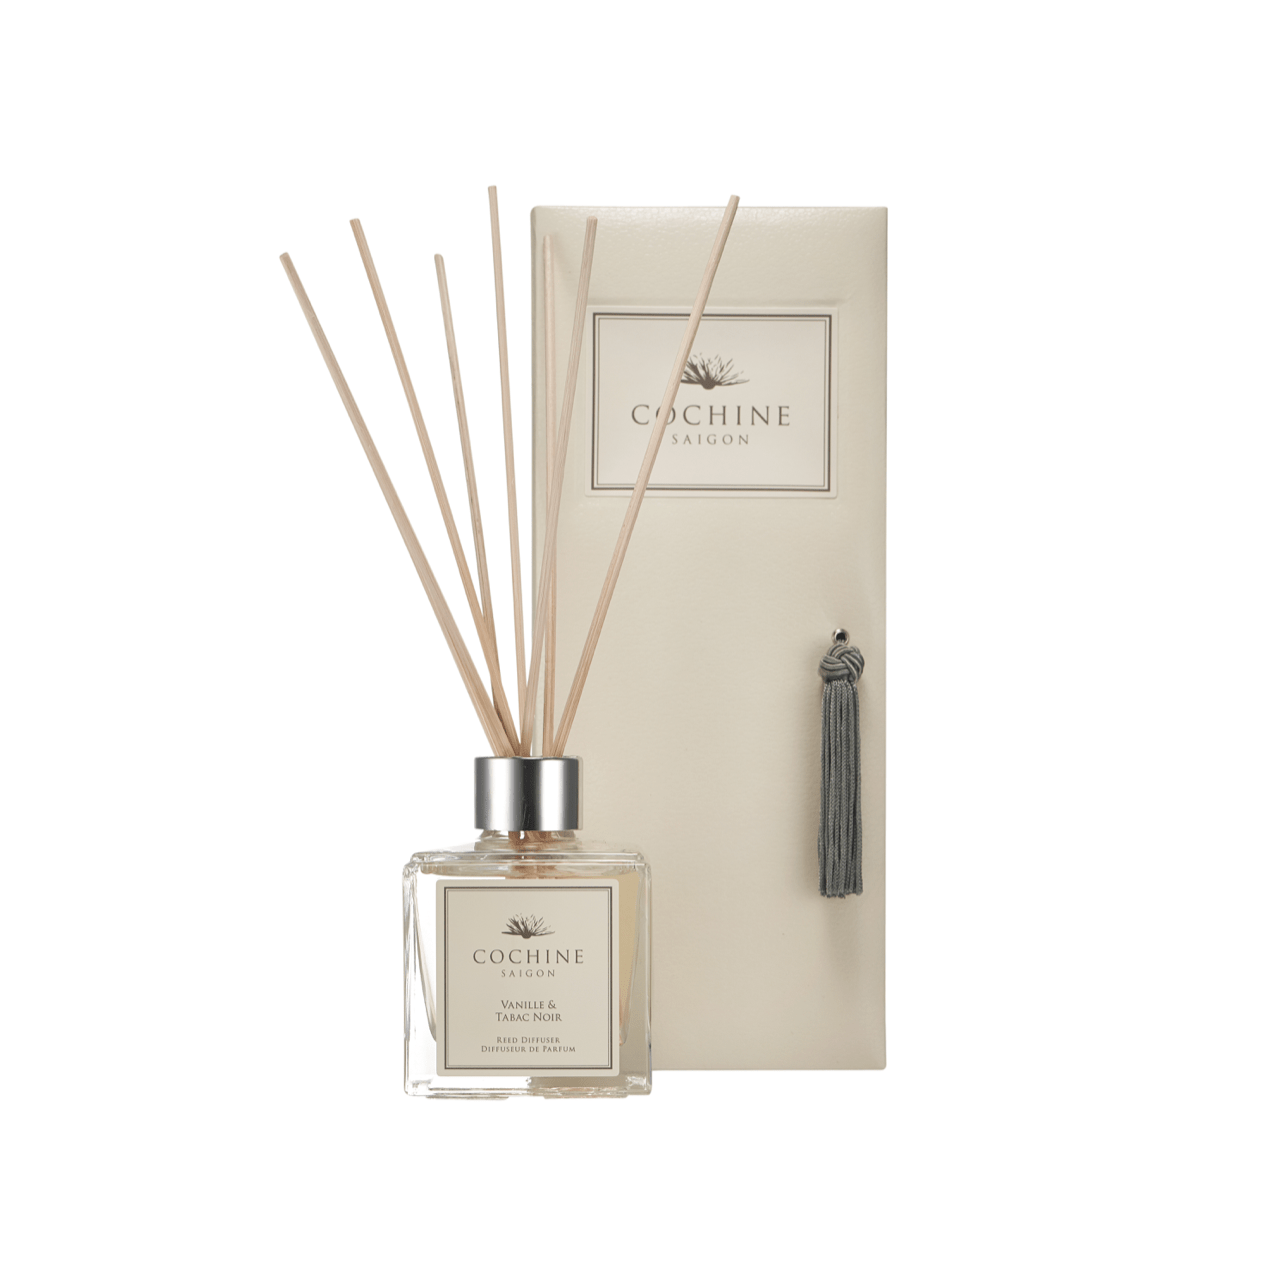 Cochine Home Fragrances of Cochines luxury scented candles and Cochine reed diffuers in Cochine Vanille & Tabac Noir Diffuser